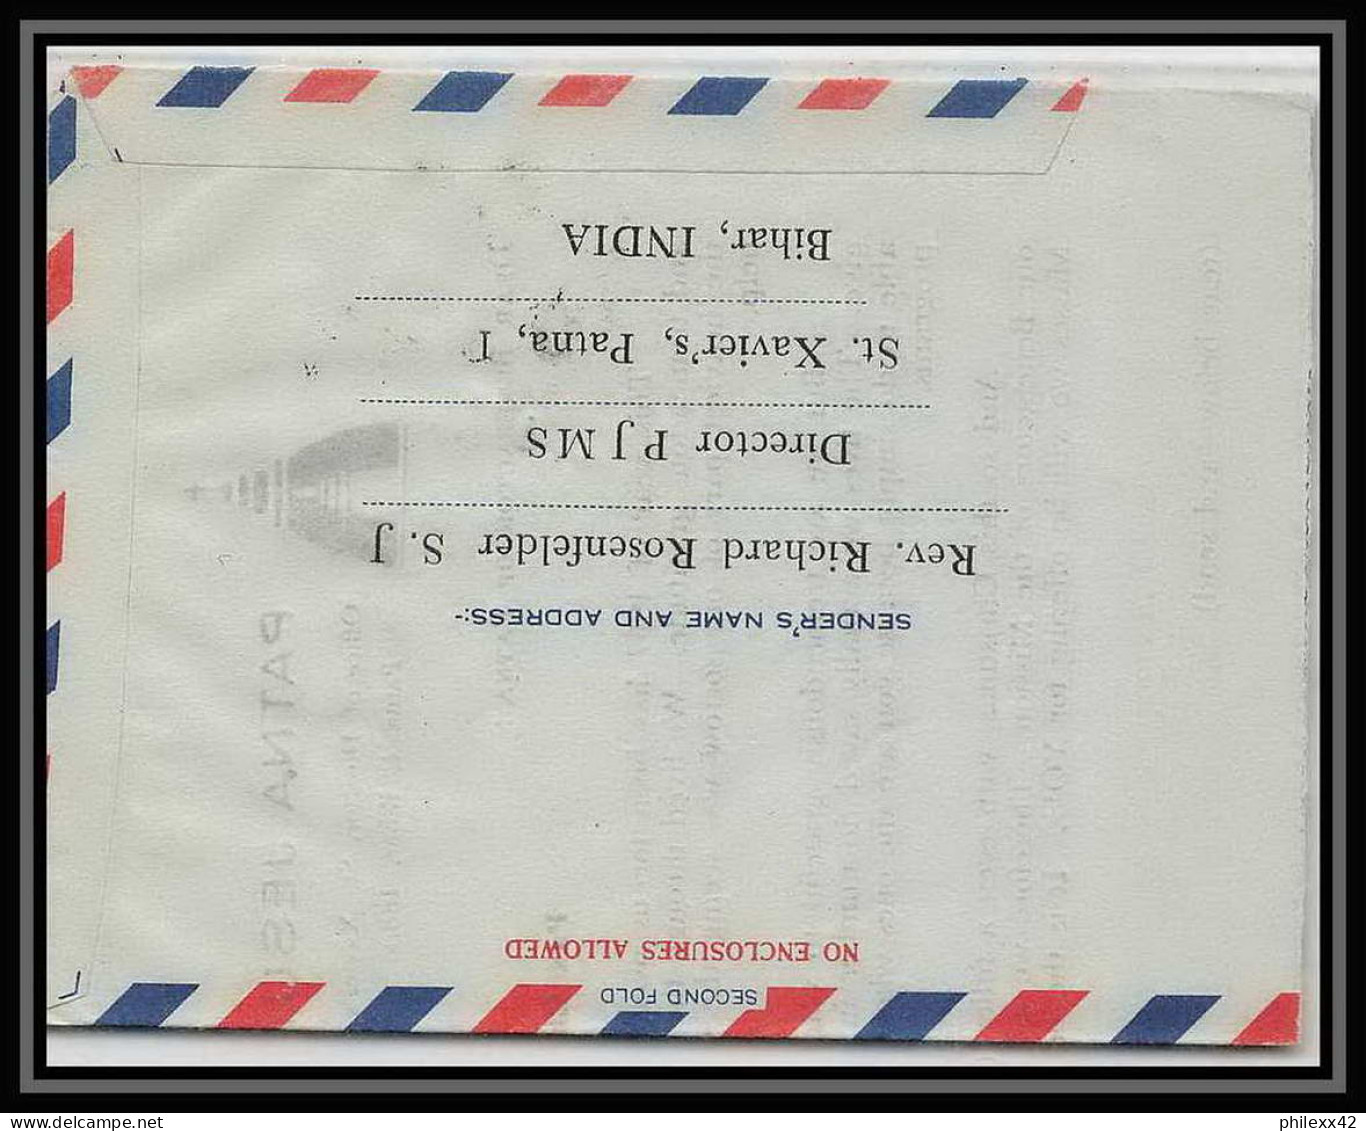 1902/ Inde (India) Entier Stationery Aerogramme Air Letter N°36 Pour Usa - Aérogrammes